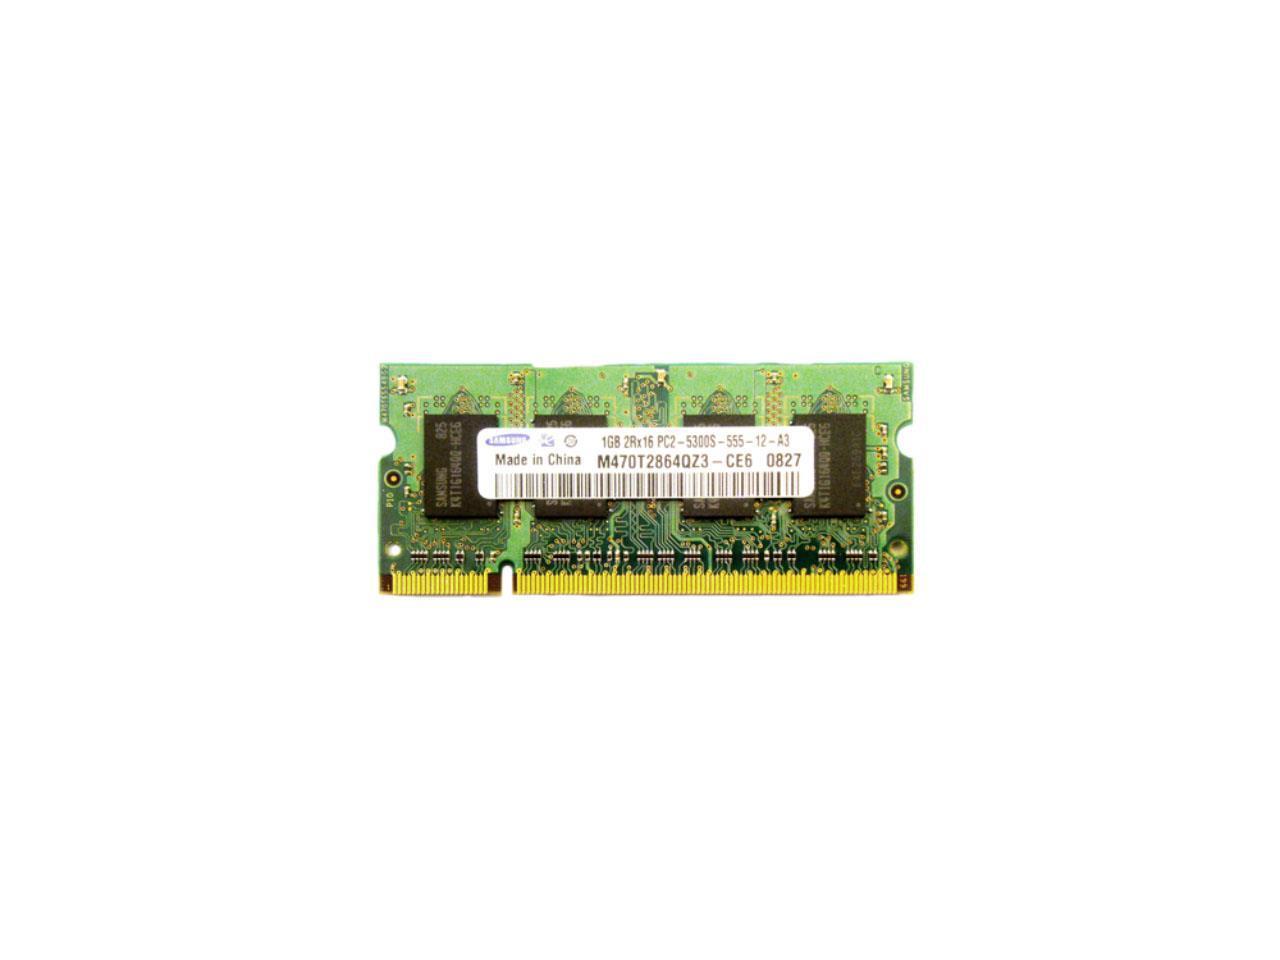 MemoryMasters 256M 144Pin 16-bit DDR2 SODIMM for HP Compatible Laserjet P2015/ P2055 HP Compatible # CB423A CP2025 P3005 CP1510 CM2320 /M2727 